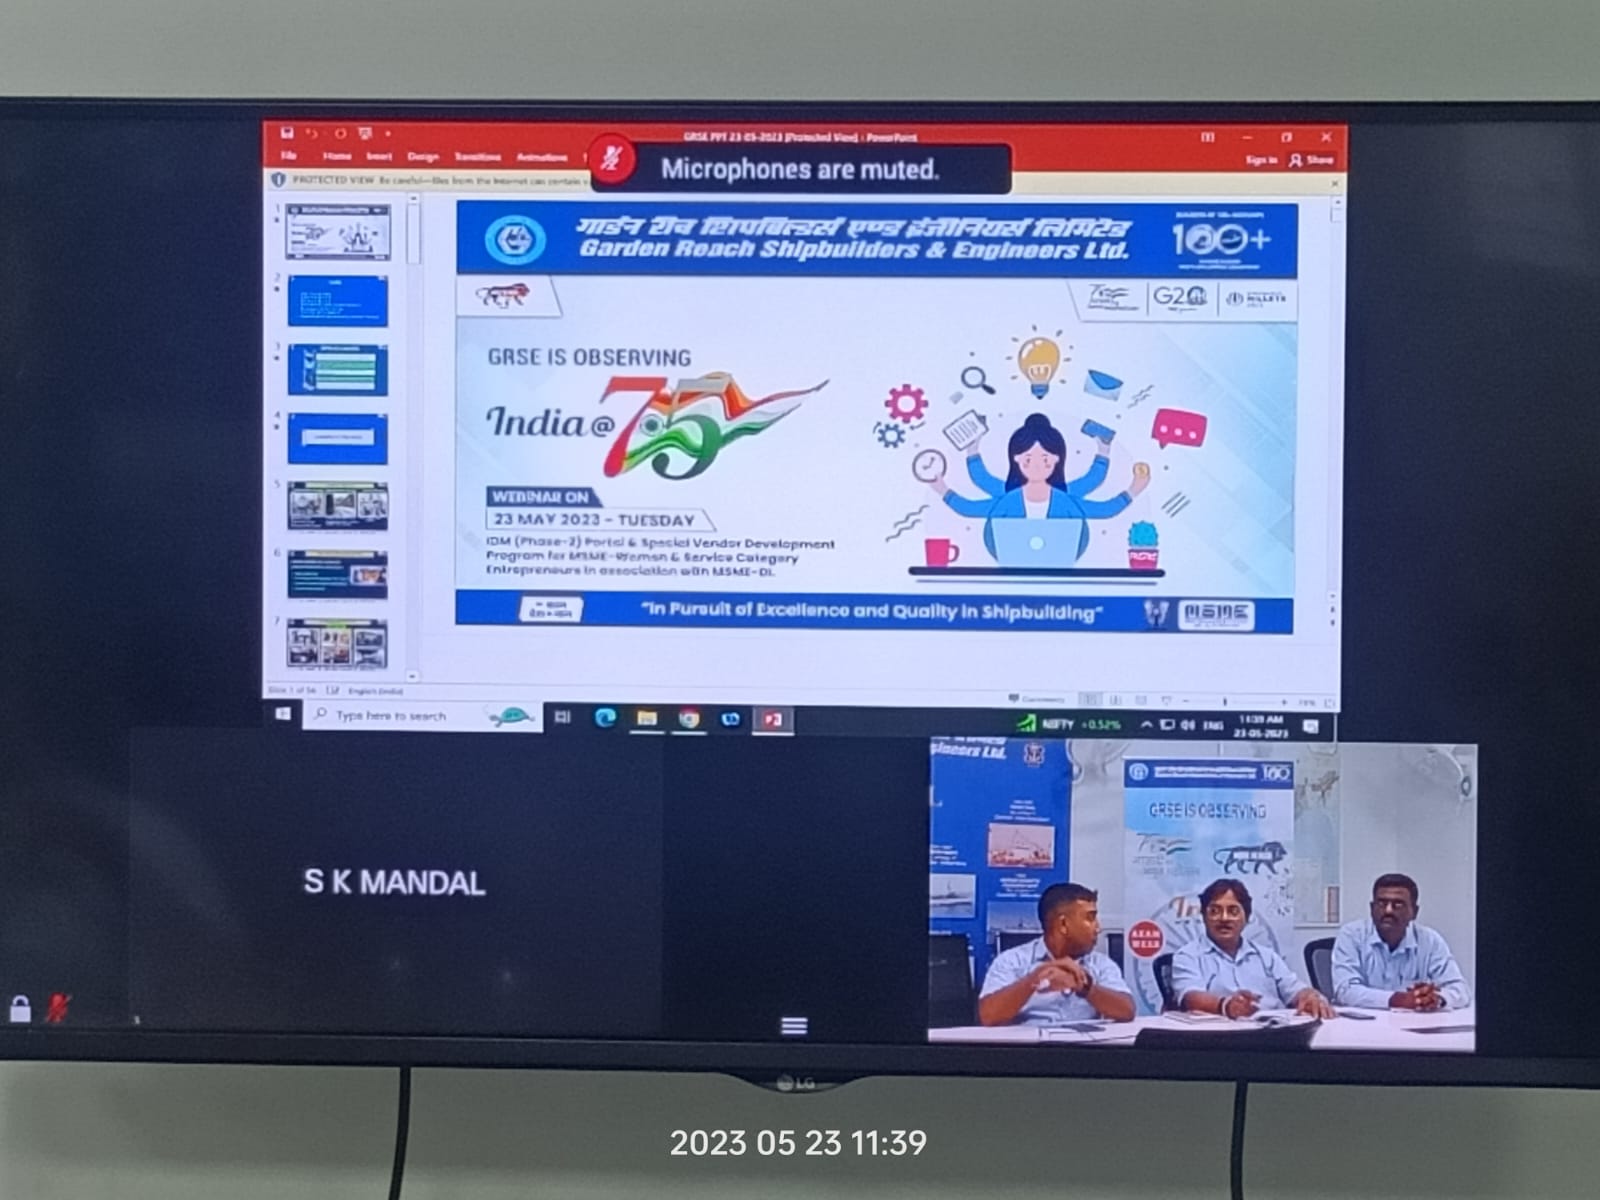 INDIA@75 - Phase X Webinar on IDM (PHASE-2) Portal & Special Vendor Development Program for MSME-Women & Service Category Entreprenuers in association with MSME-DI on 23 May 23 - Thumbnail